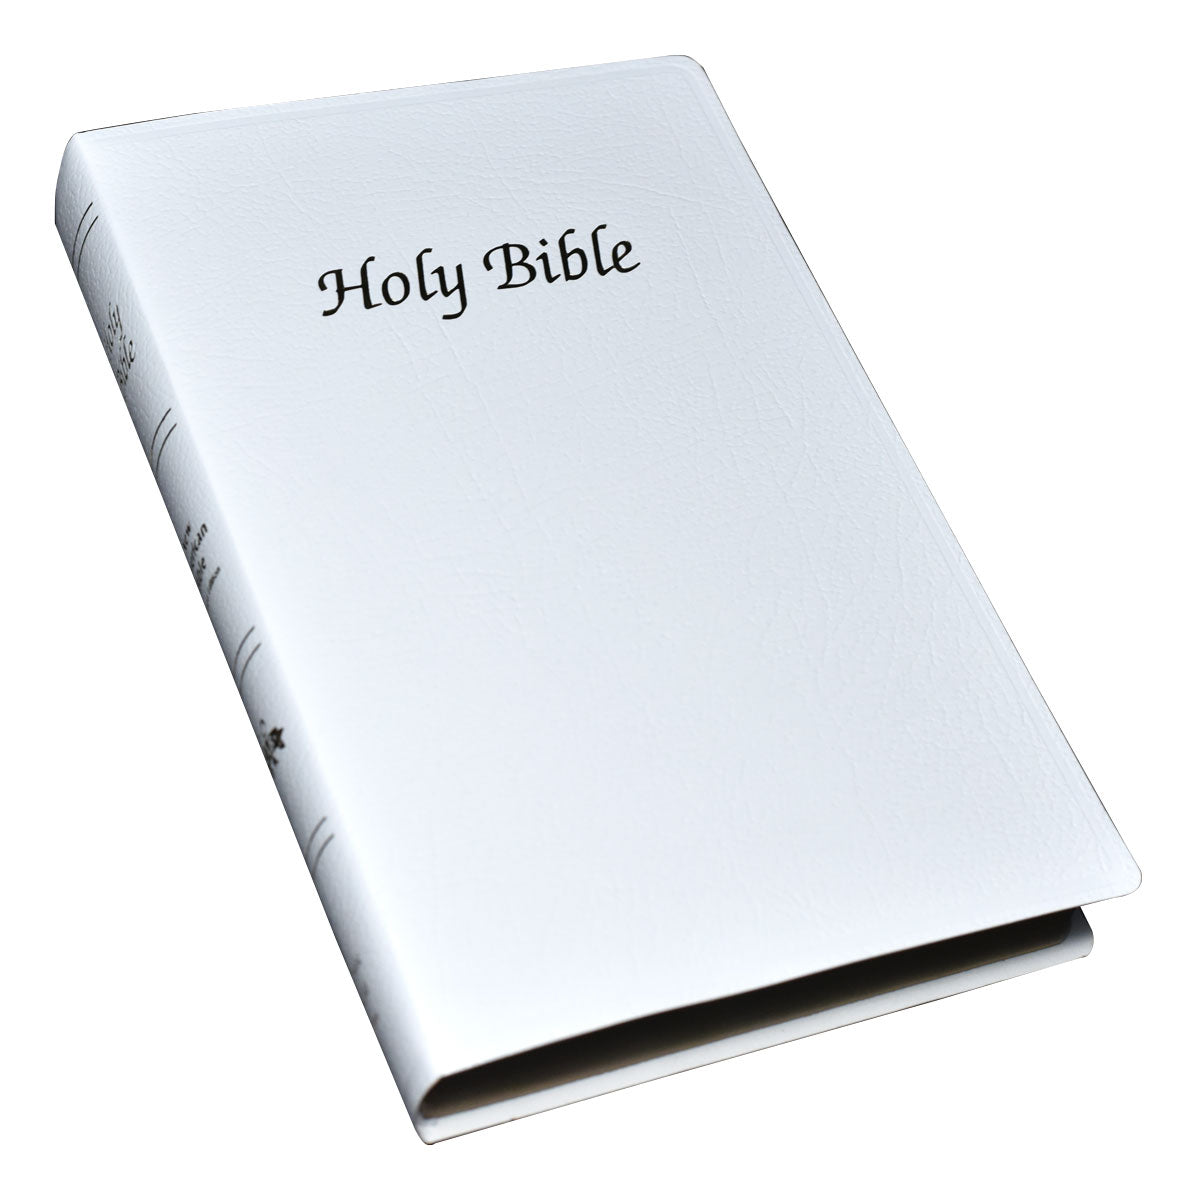 NABRE First Communion Bible - White - Indexed